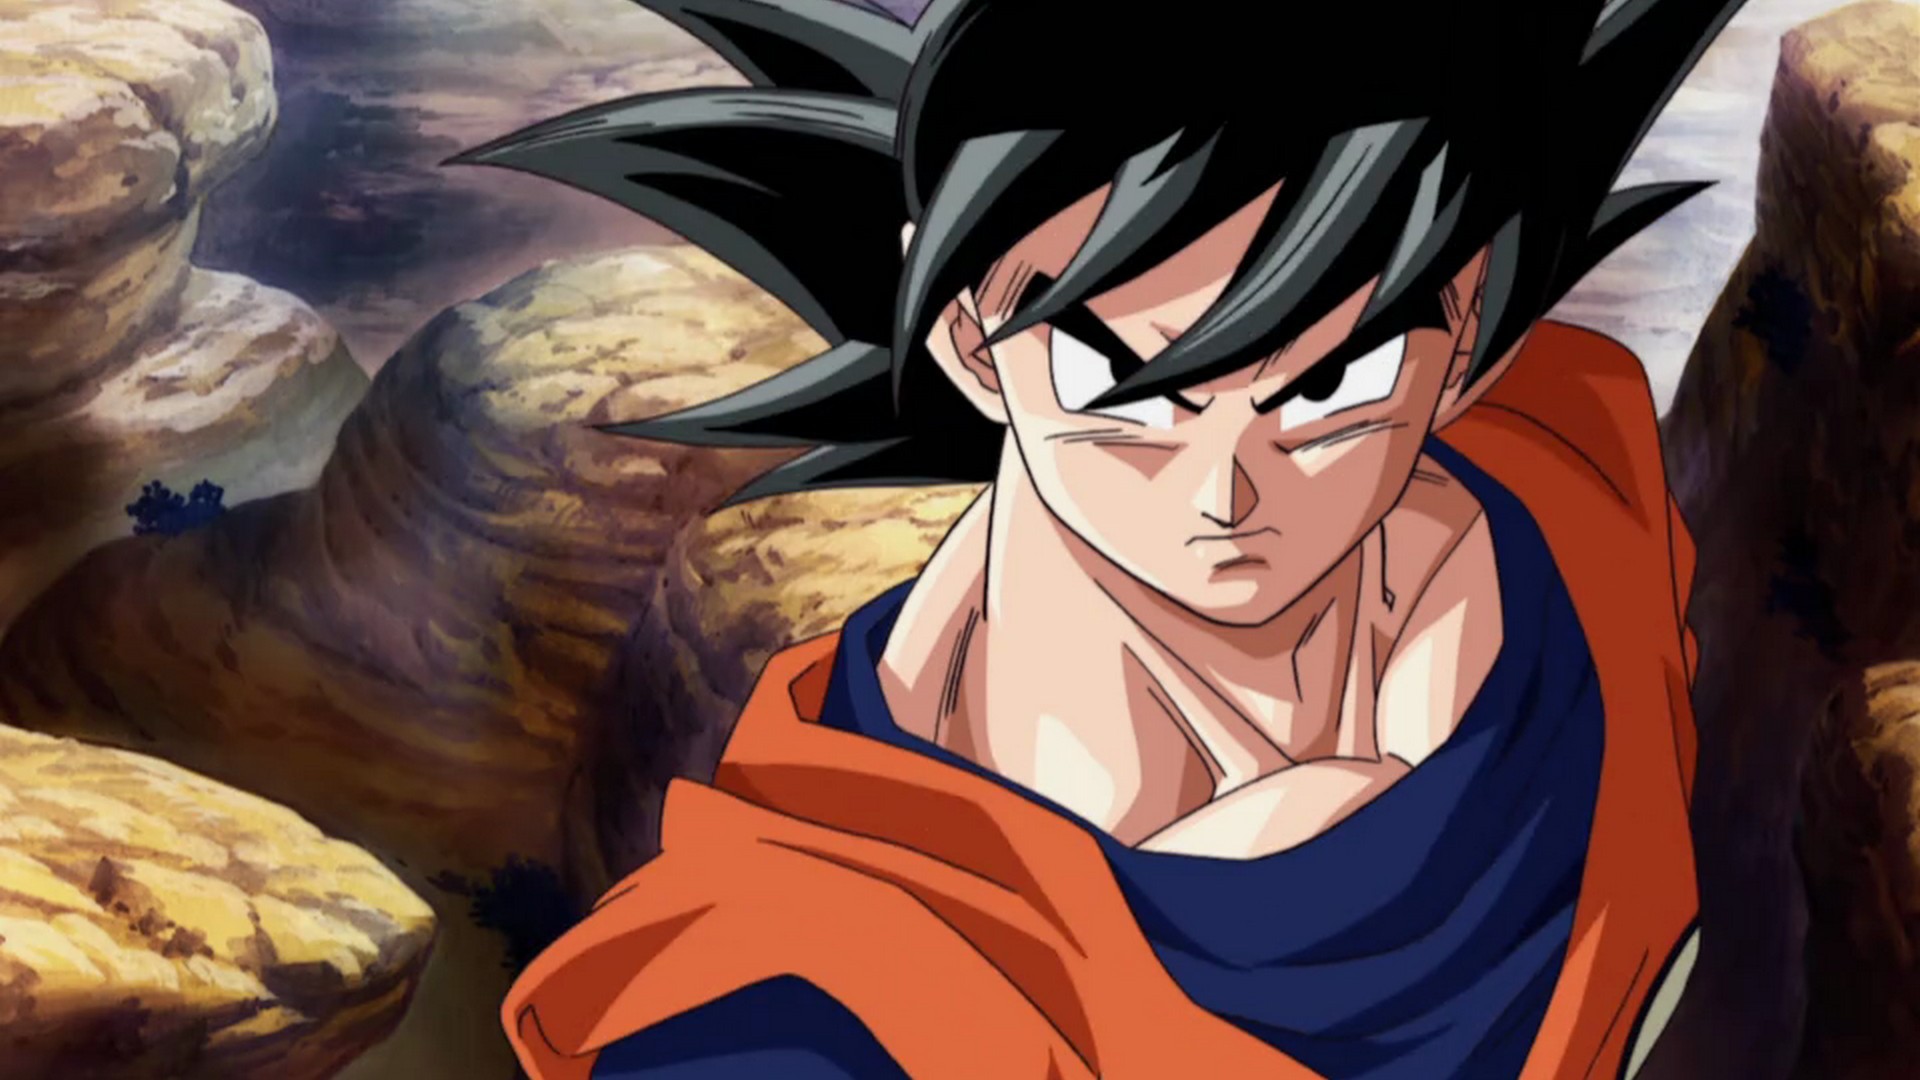 Wallpaper Goku with image resolution 1920x1080 pixel. You can use this wallpaper as background for your desktop Computer Screensavers, Android or iPhone smartphones